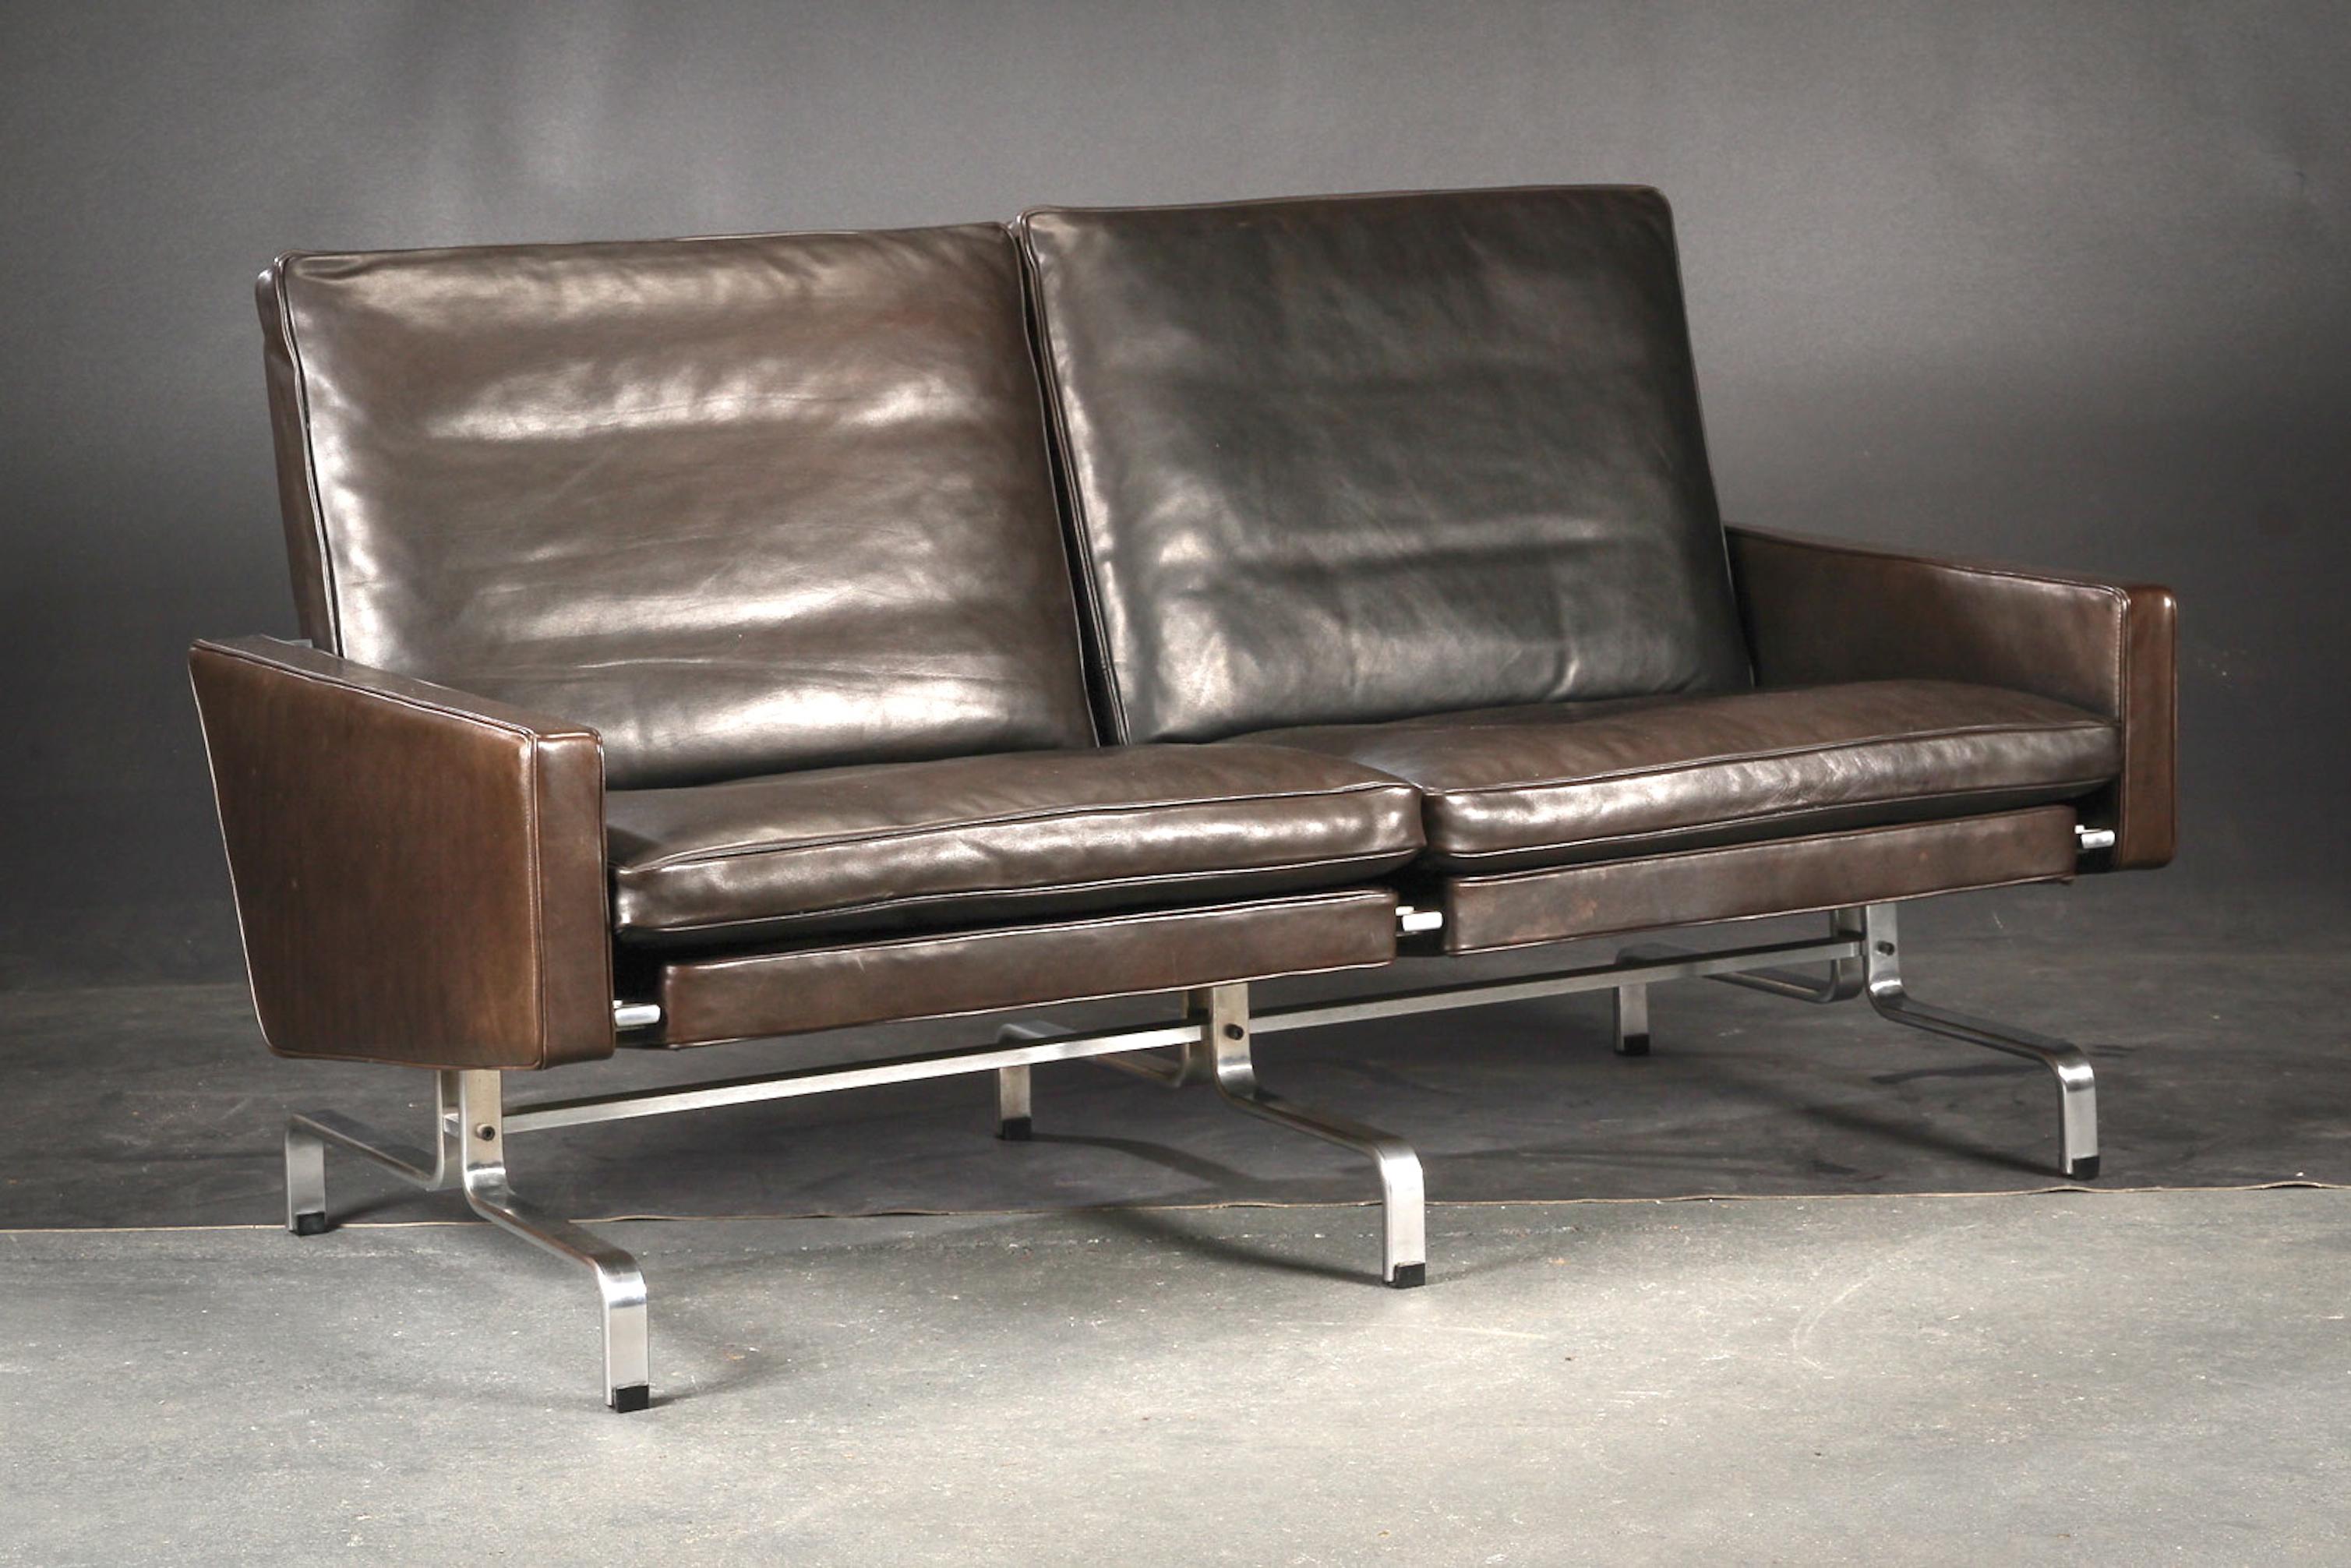 A two-seat sofa designed by Poul Kjaerhom and edited by Kold Christensen in 1958. Stamped.Frame in chromed steel. Back, sides and loose cushions upholstered in original black 